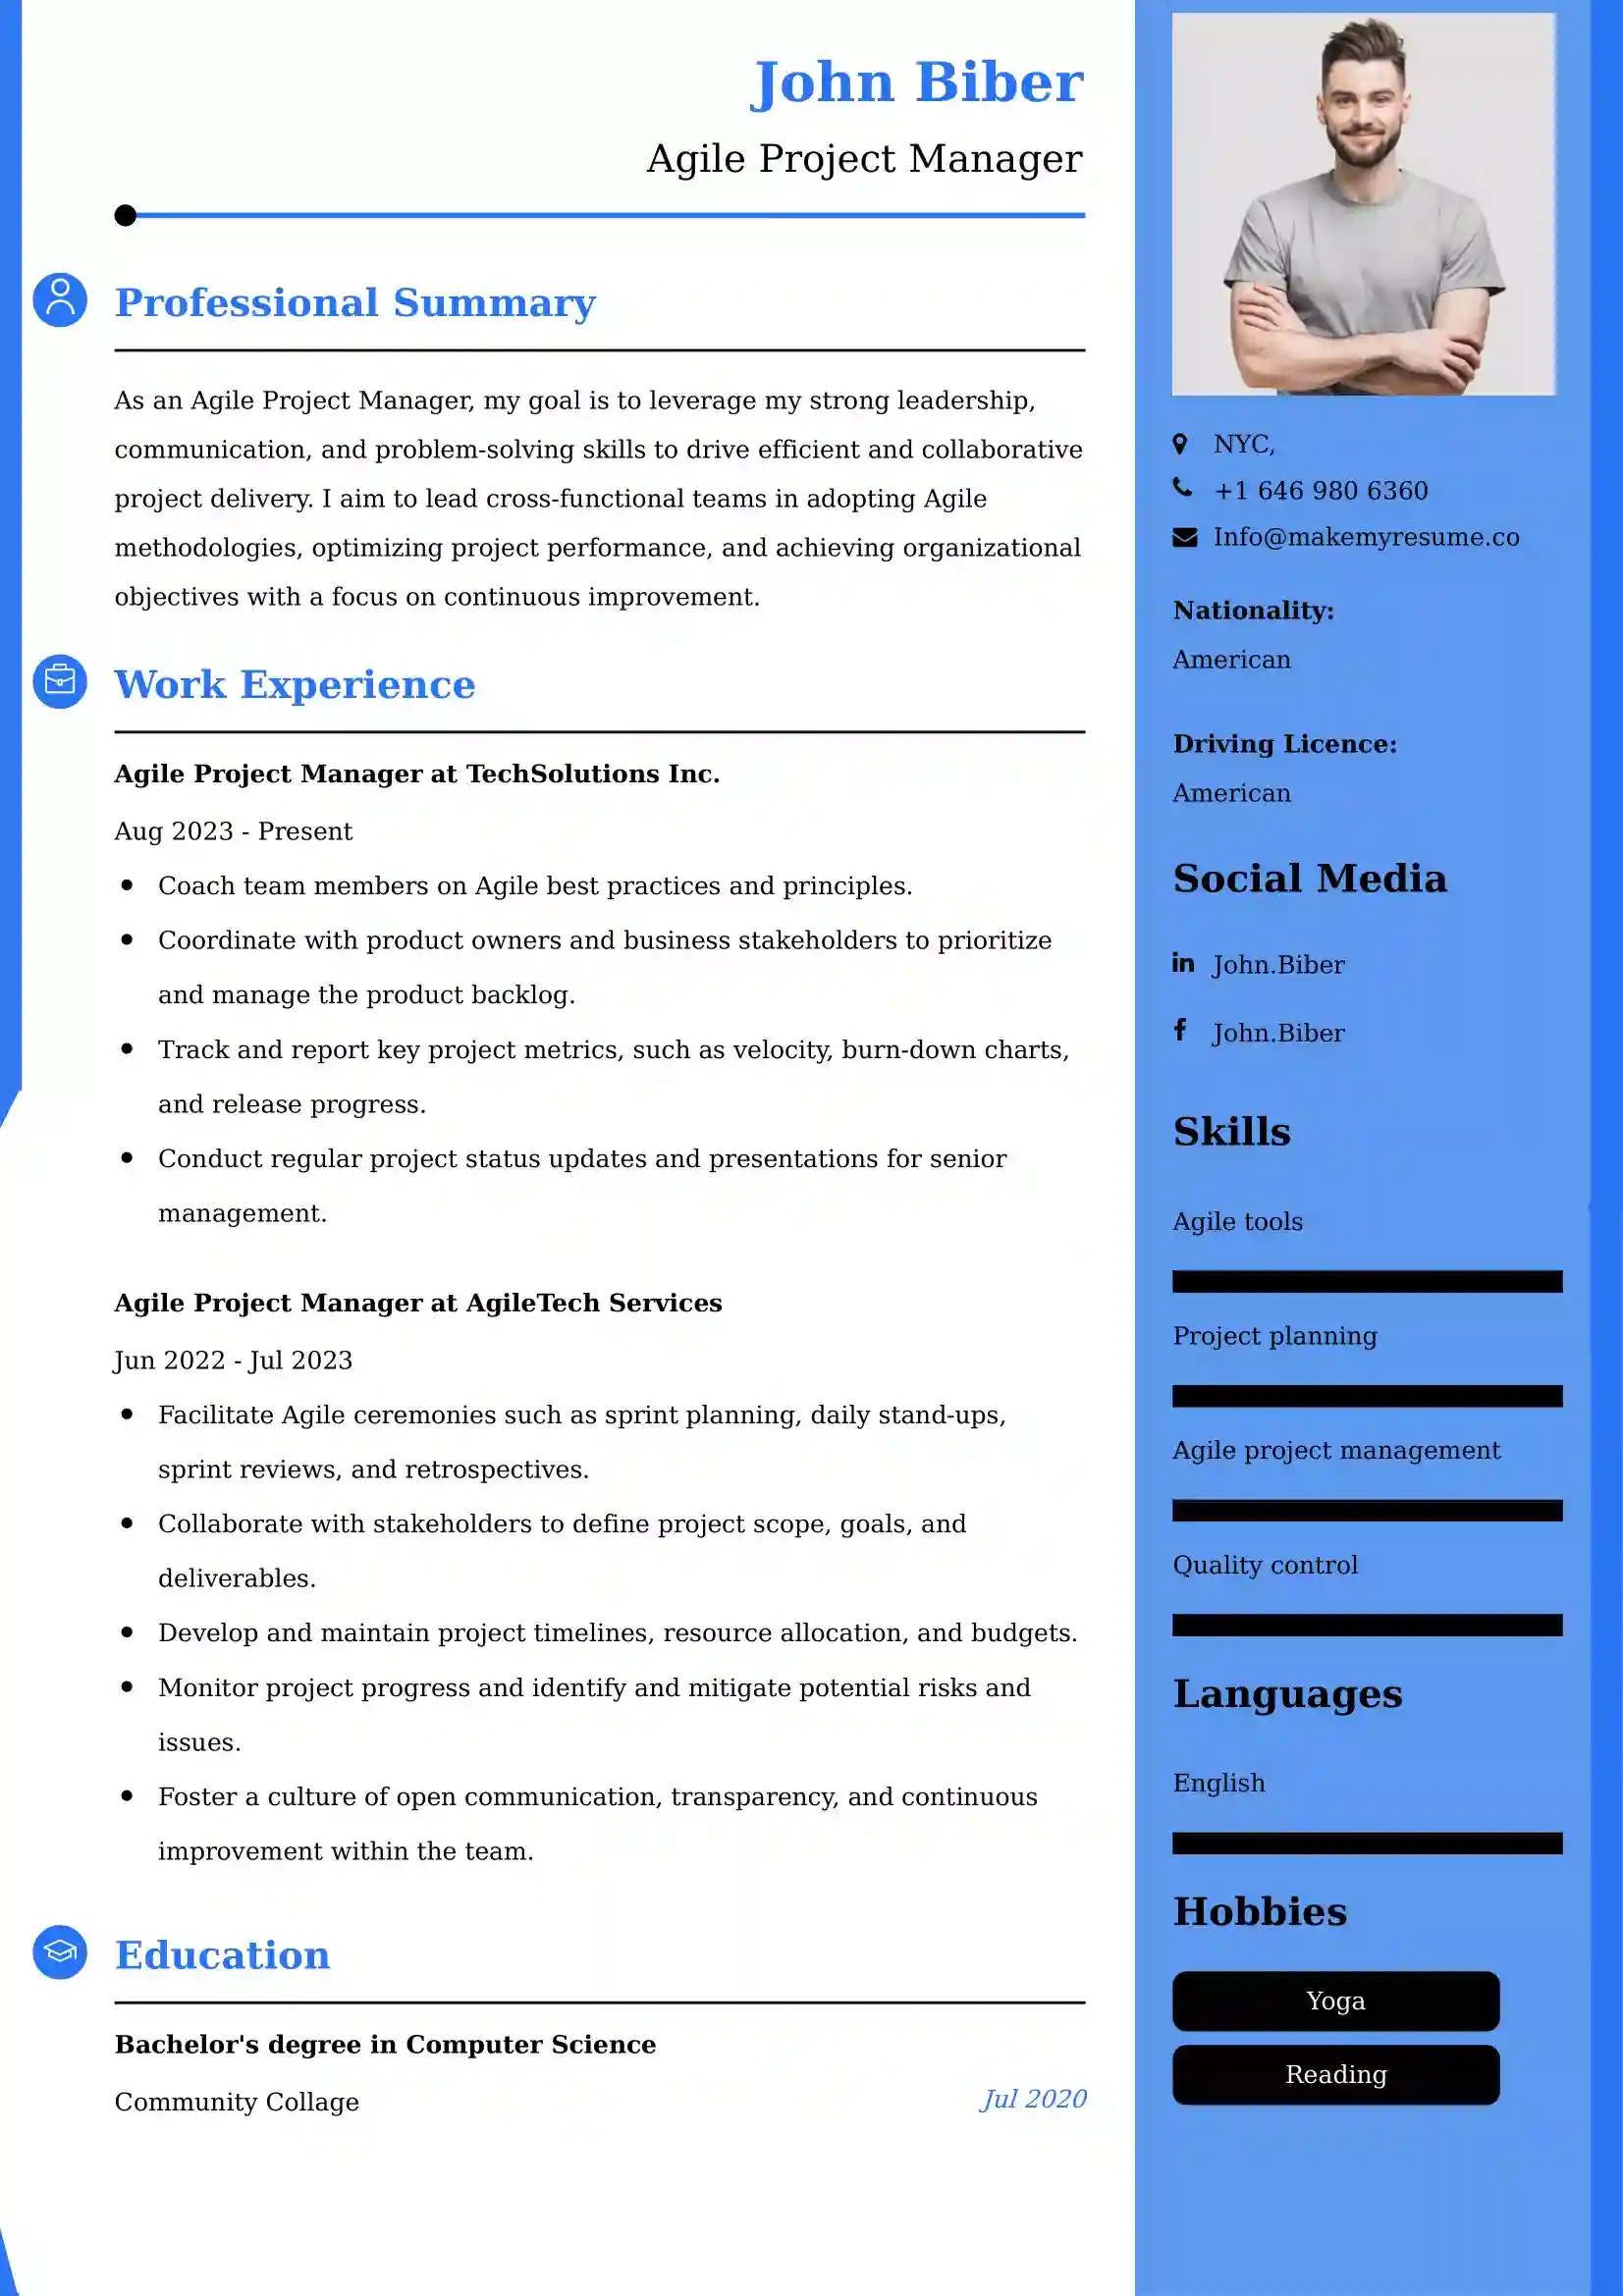 Agile Project Manager Resume Examples - UK Format, Latest Template.